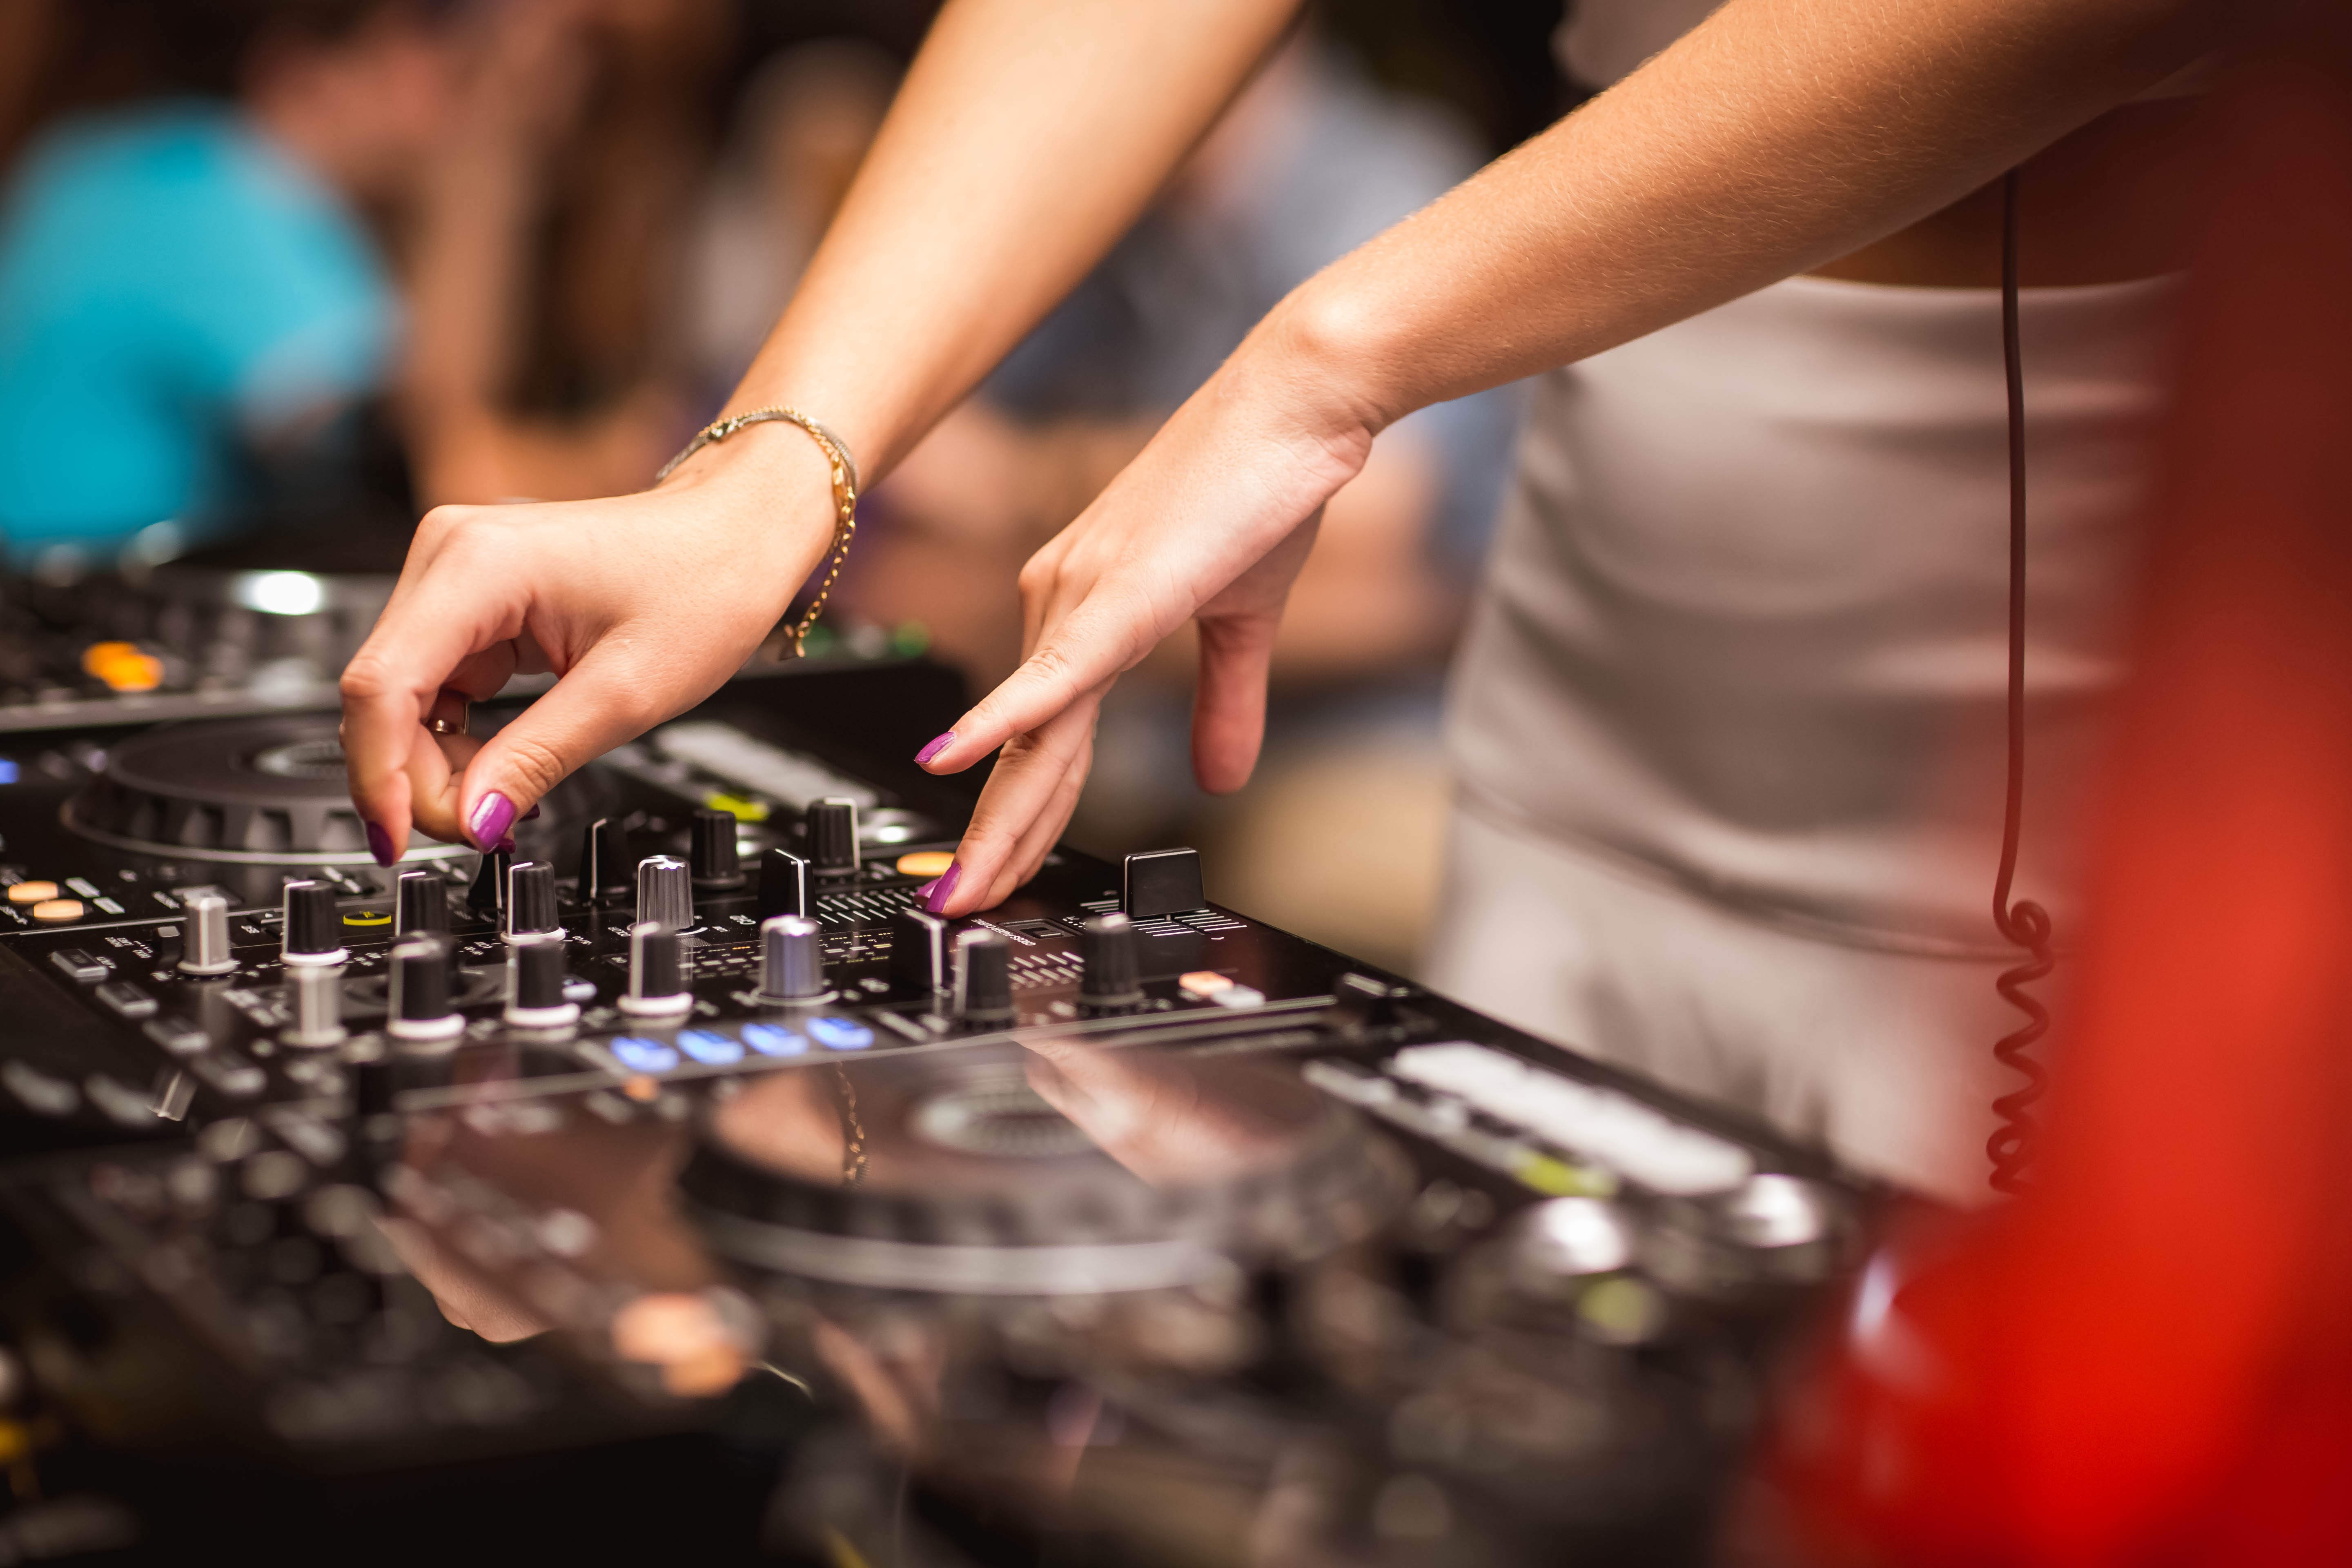 Singapore’s women DJs are fighting back against sexist stereotyping. Photo: Shutterstock